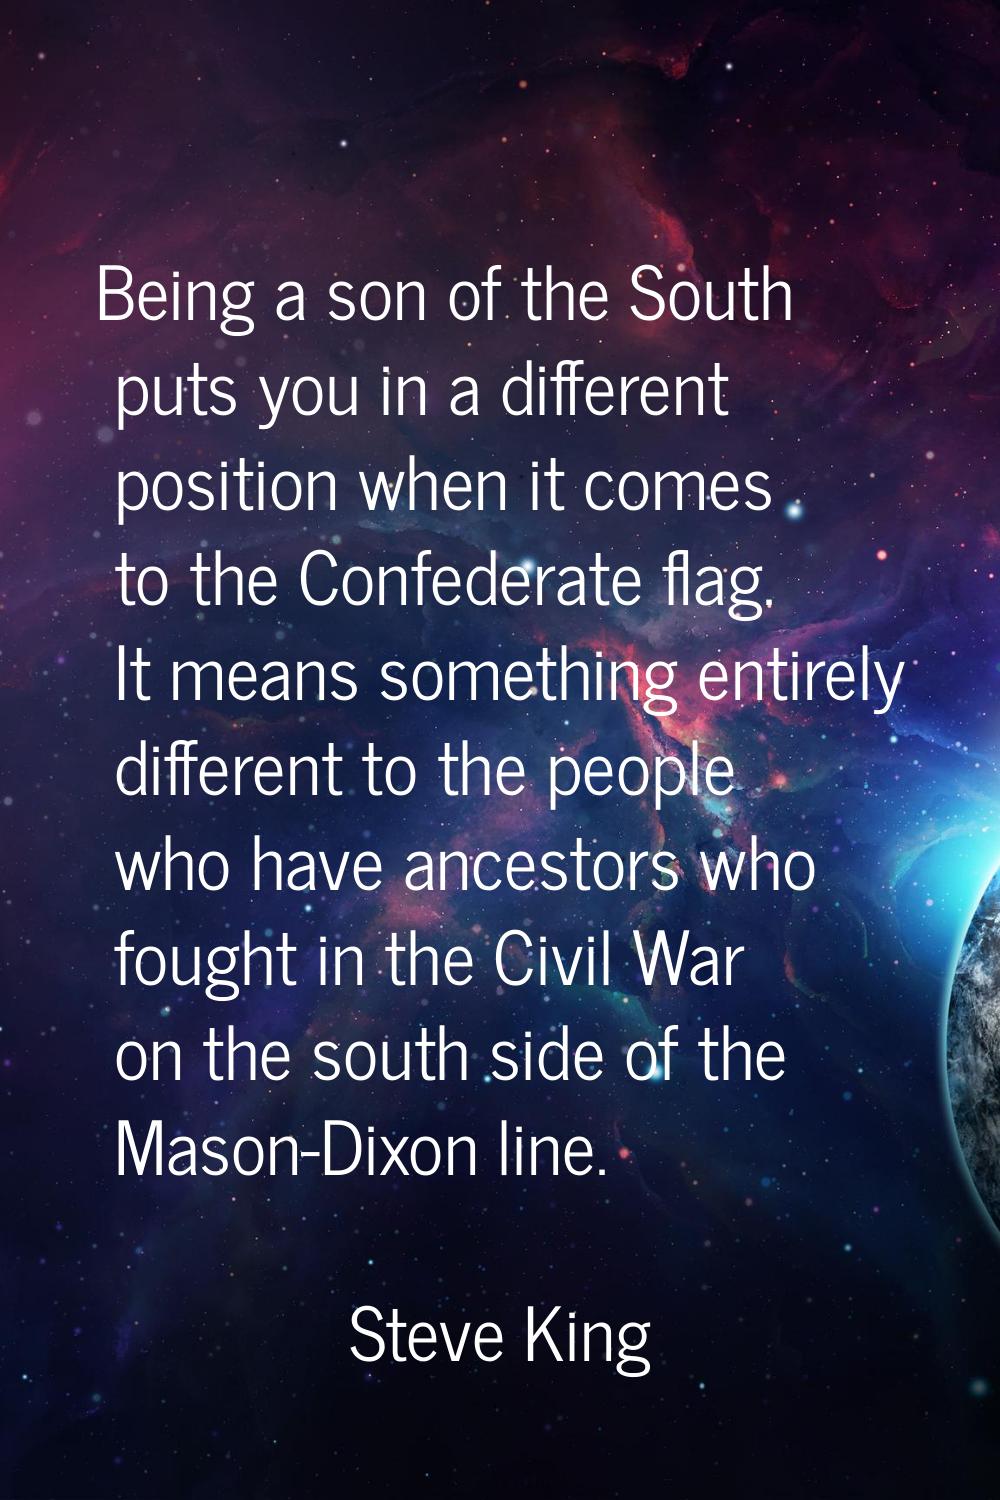 Being a son of the South puts you in a different position when it comes to the Confederate flag. It